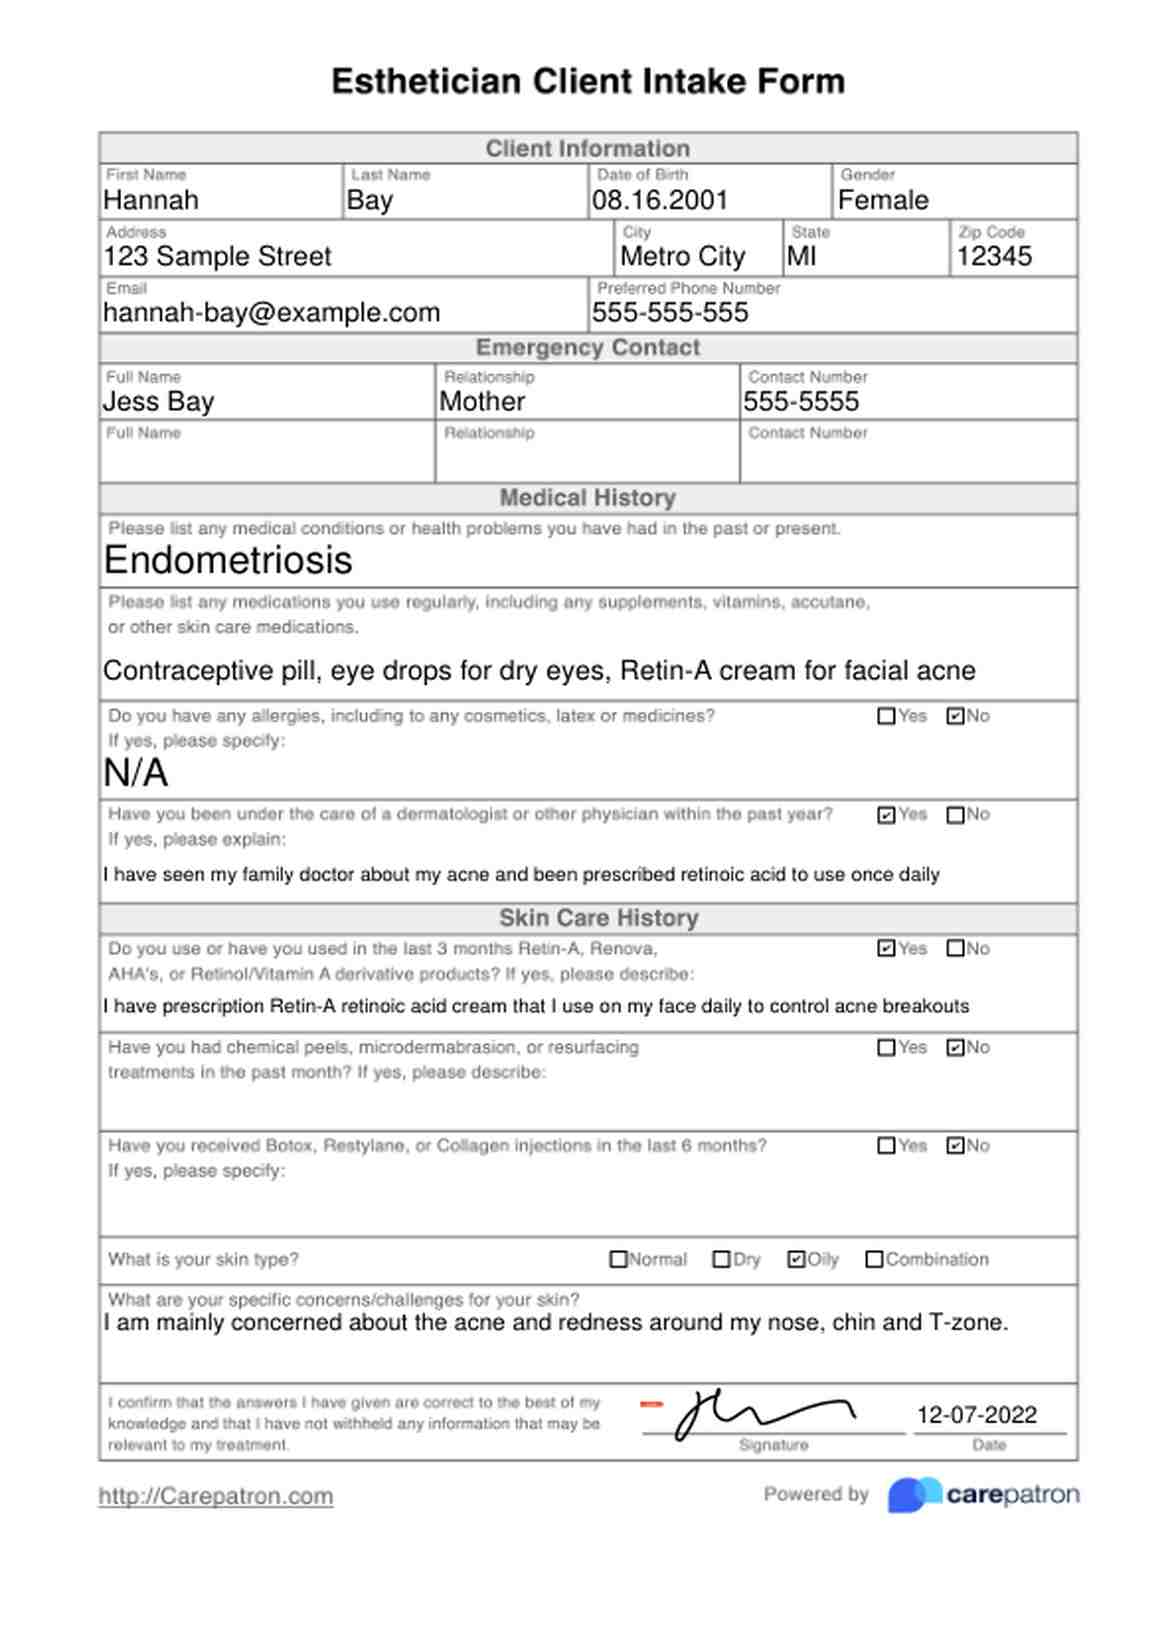 Esthetician Client Intake Form PDF Example